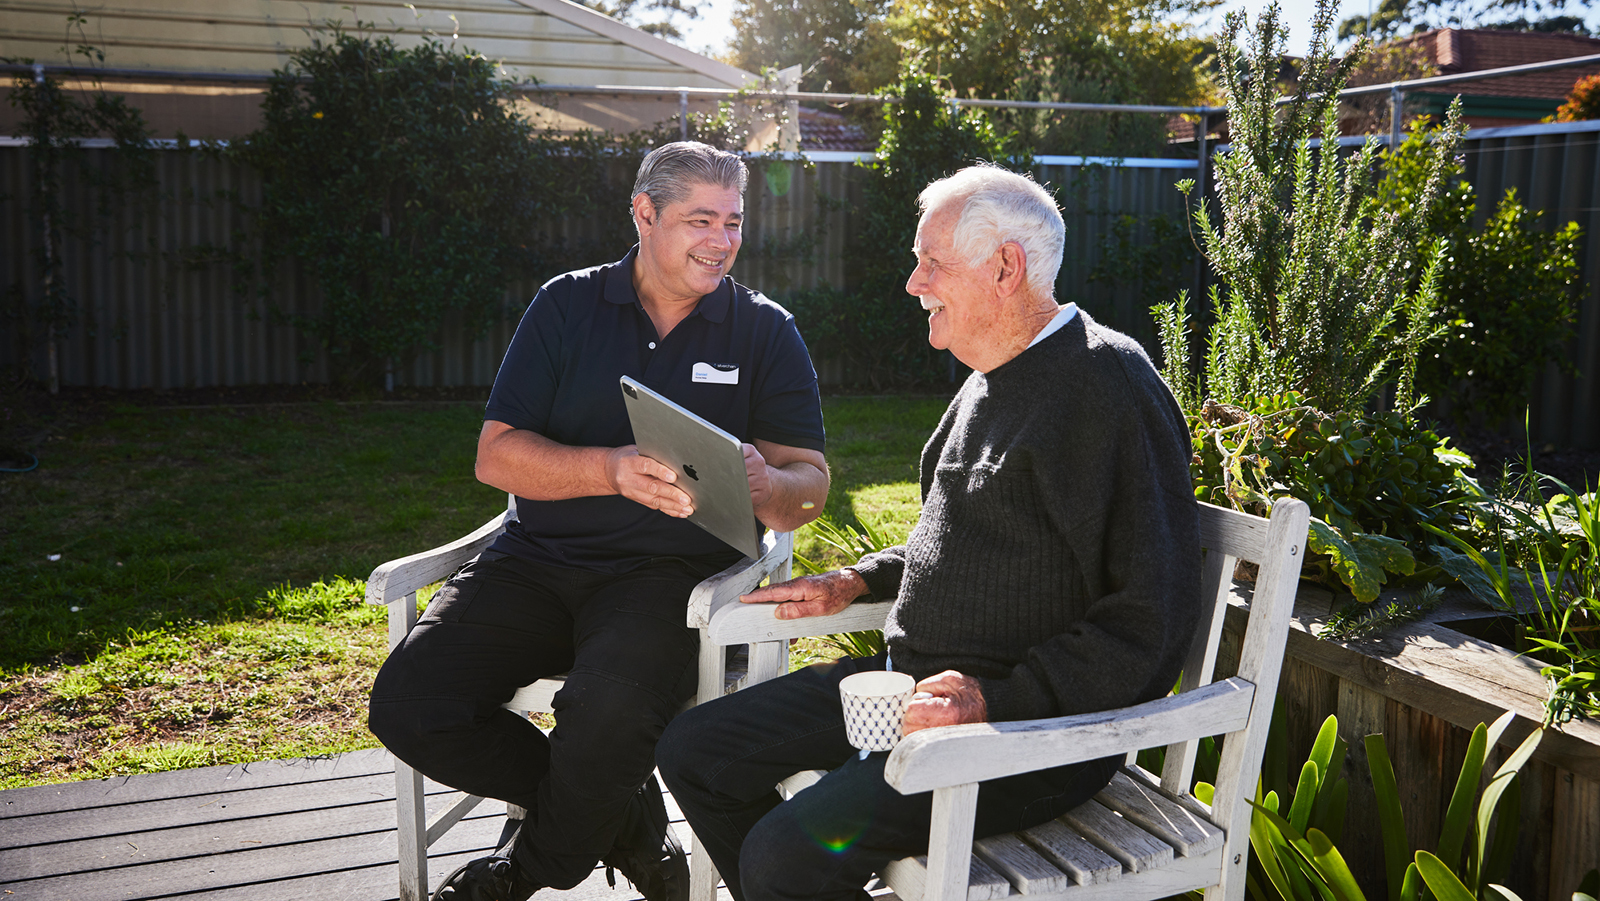 Two men sitting in backyard looking at tablet device